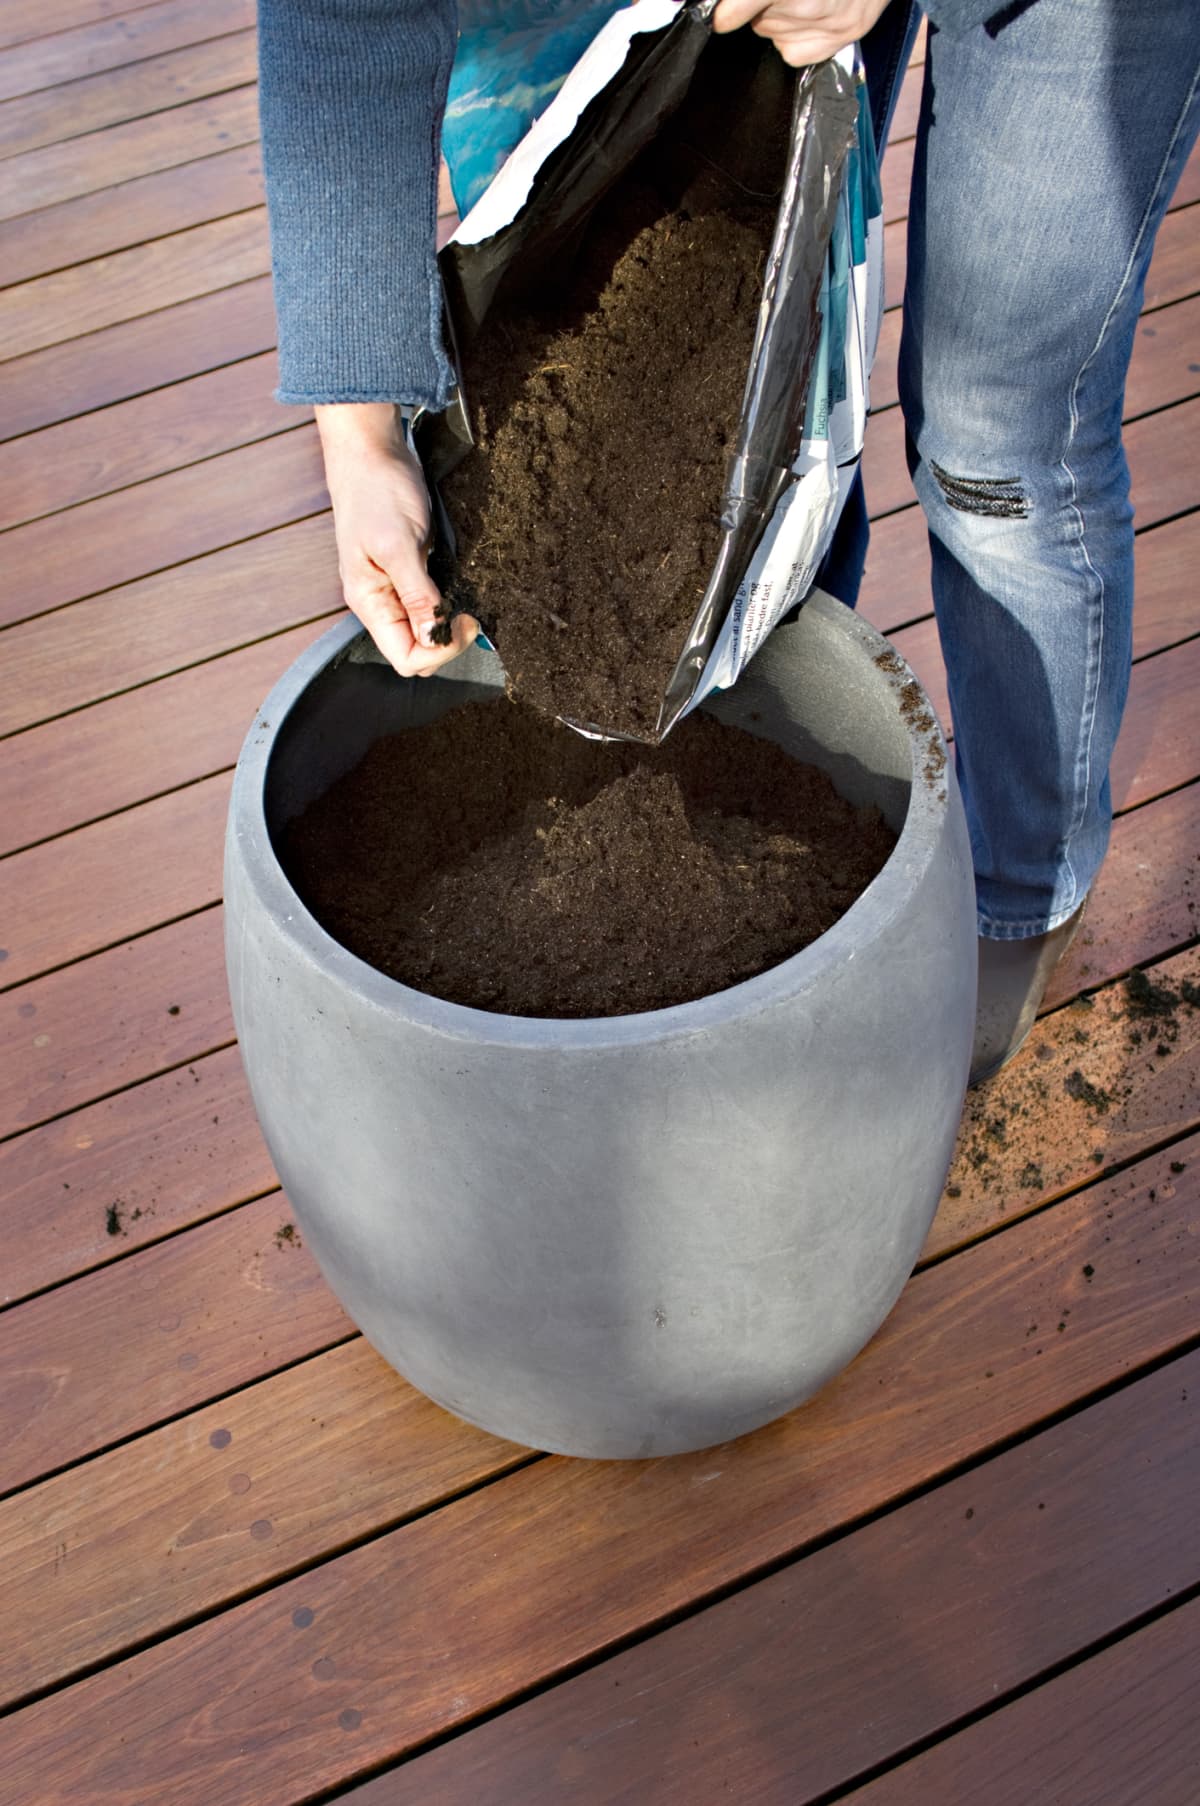 Someone pouring compost into a pot